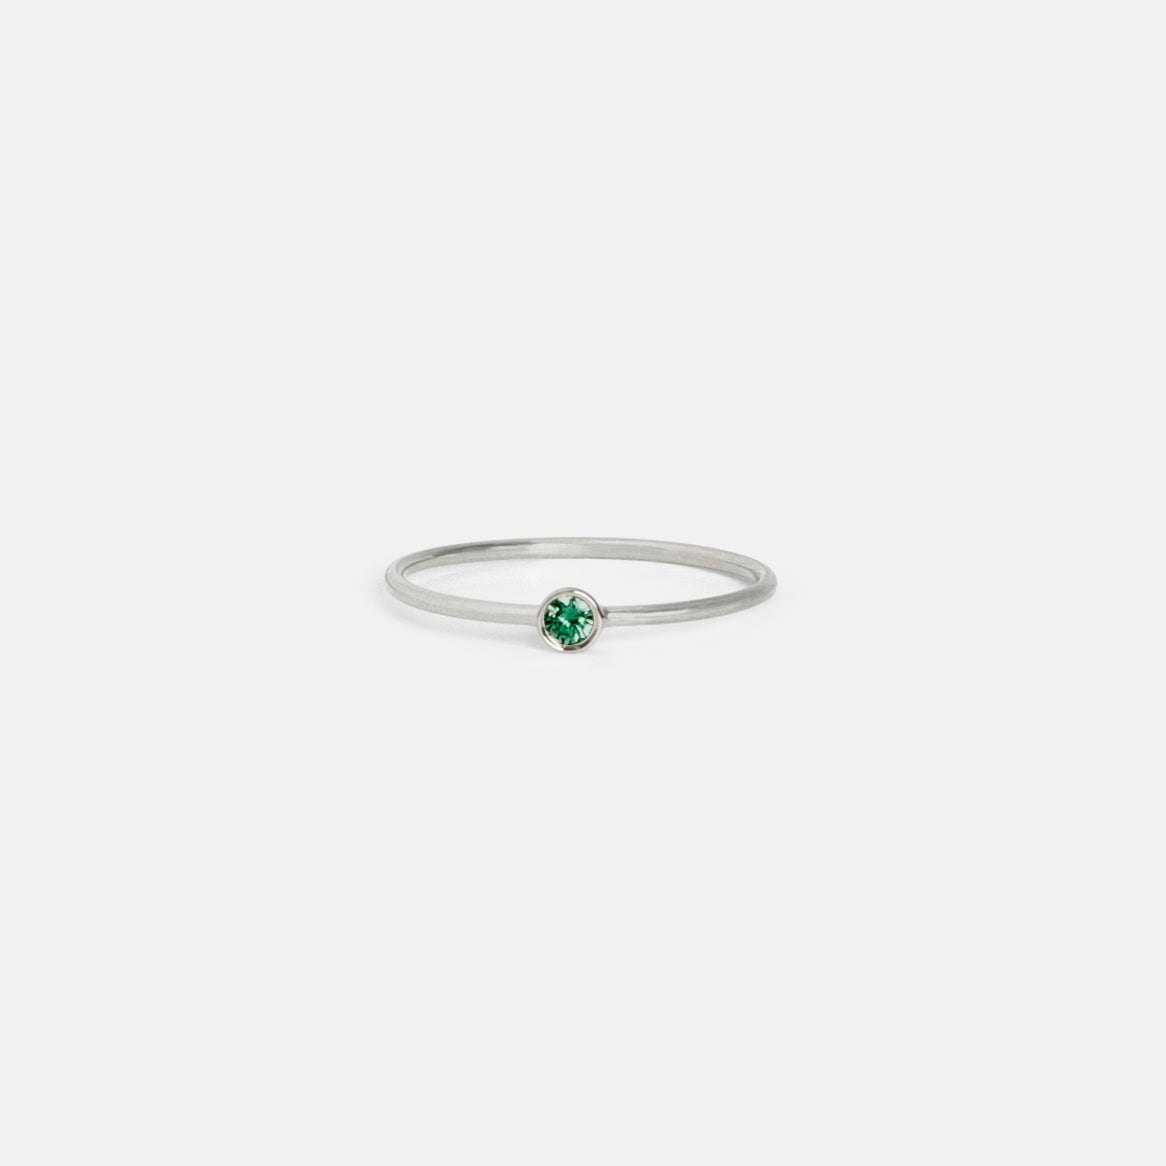 Large Kaya Ring in 14k White Gold set with Emerald by SHW Fine Jewelry